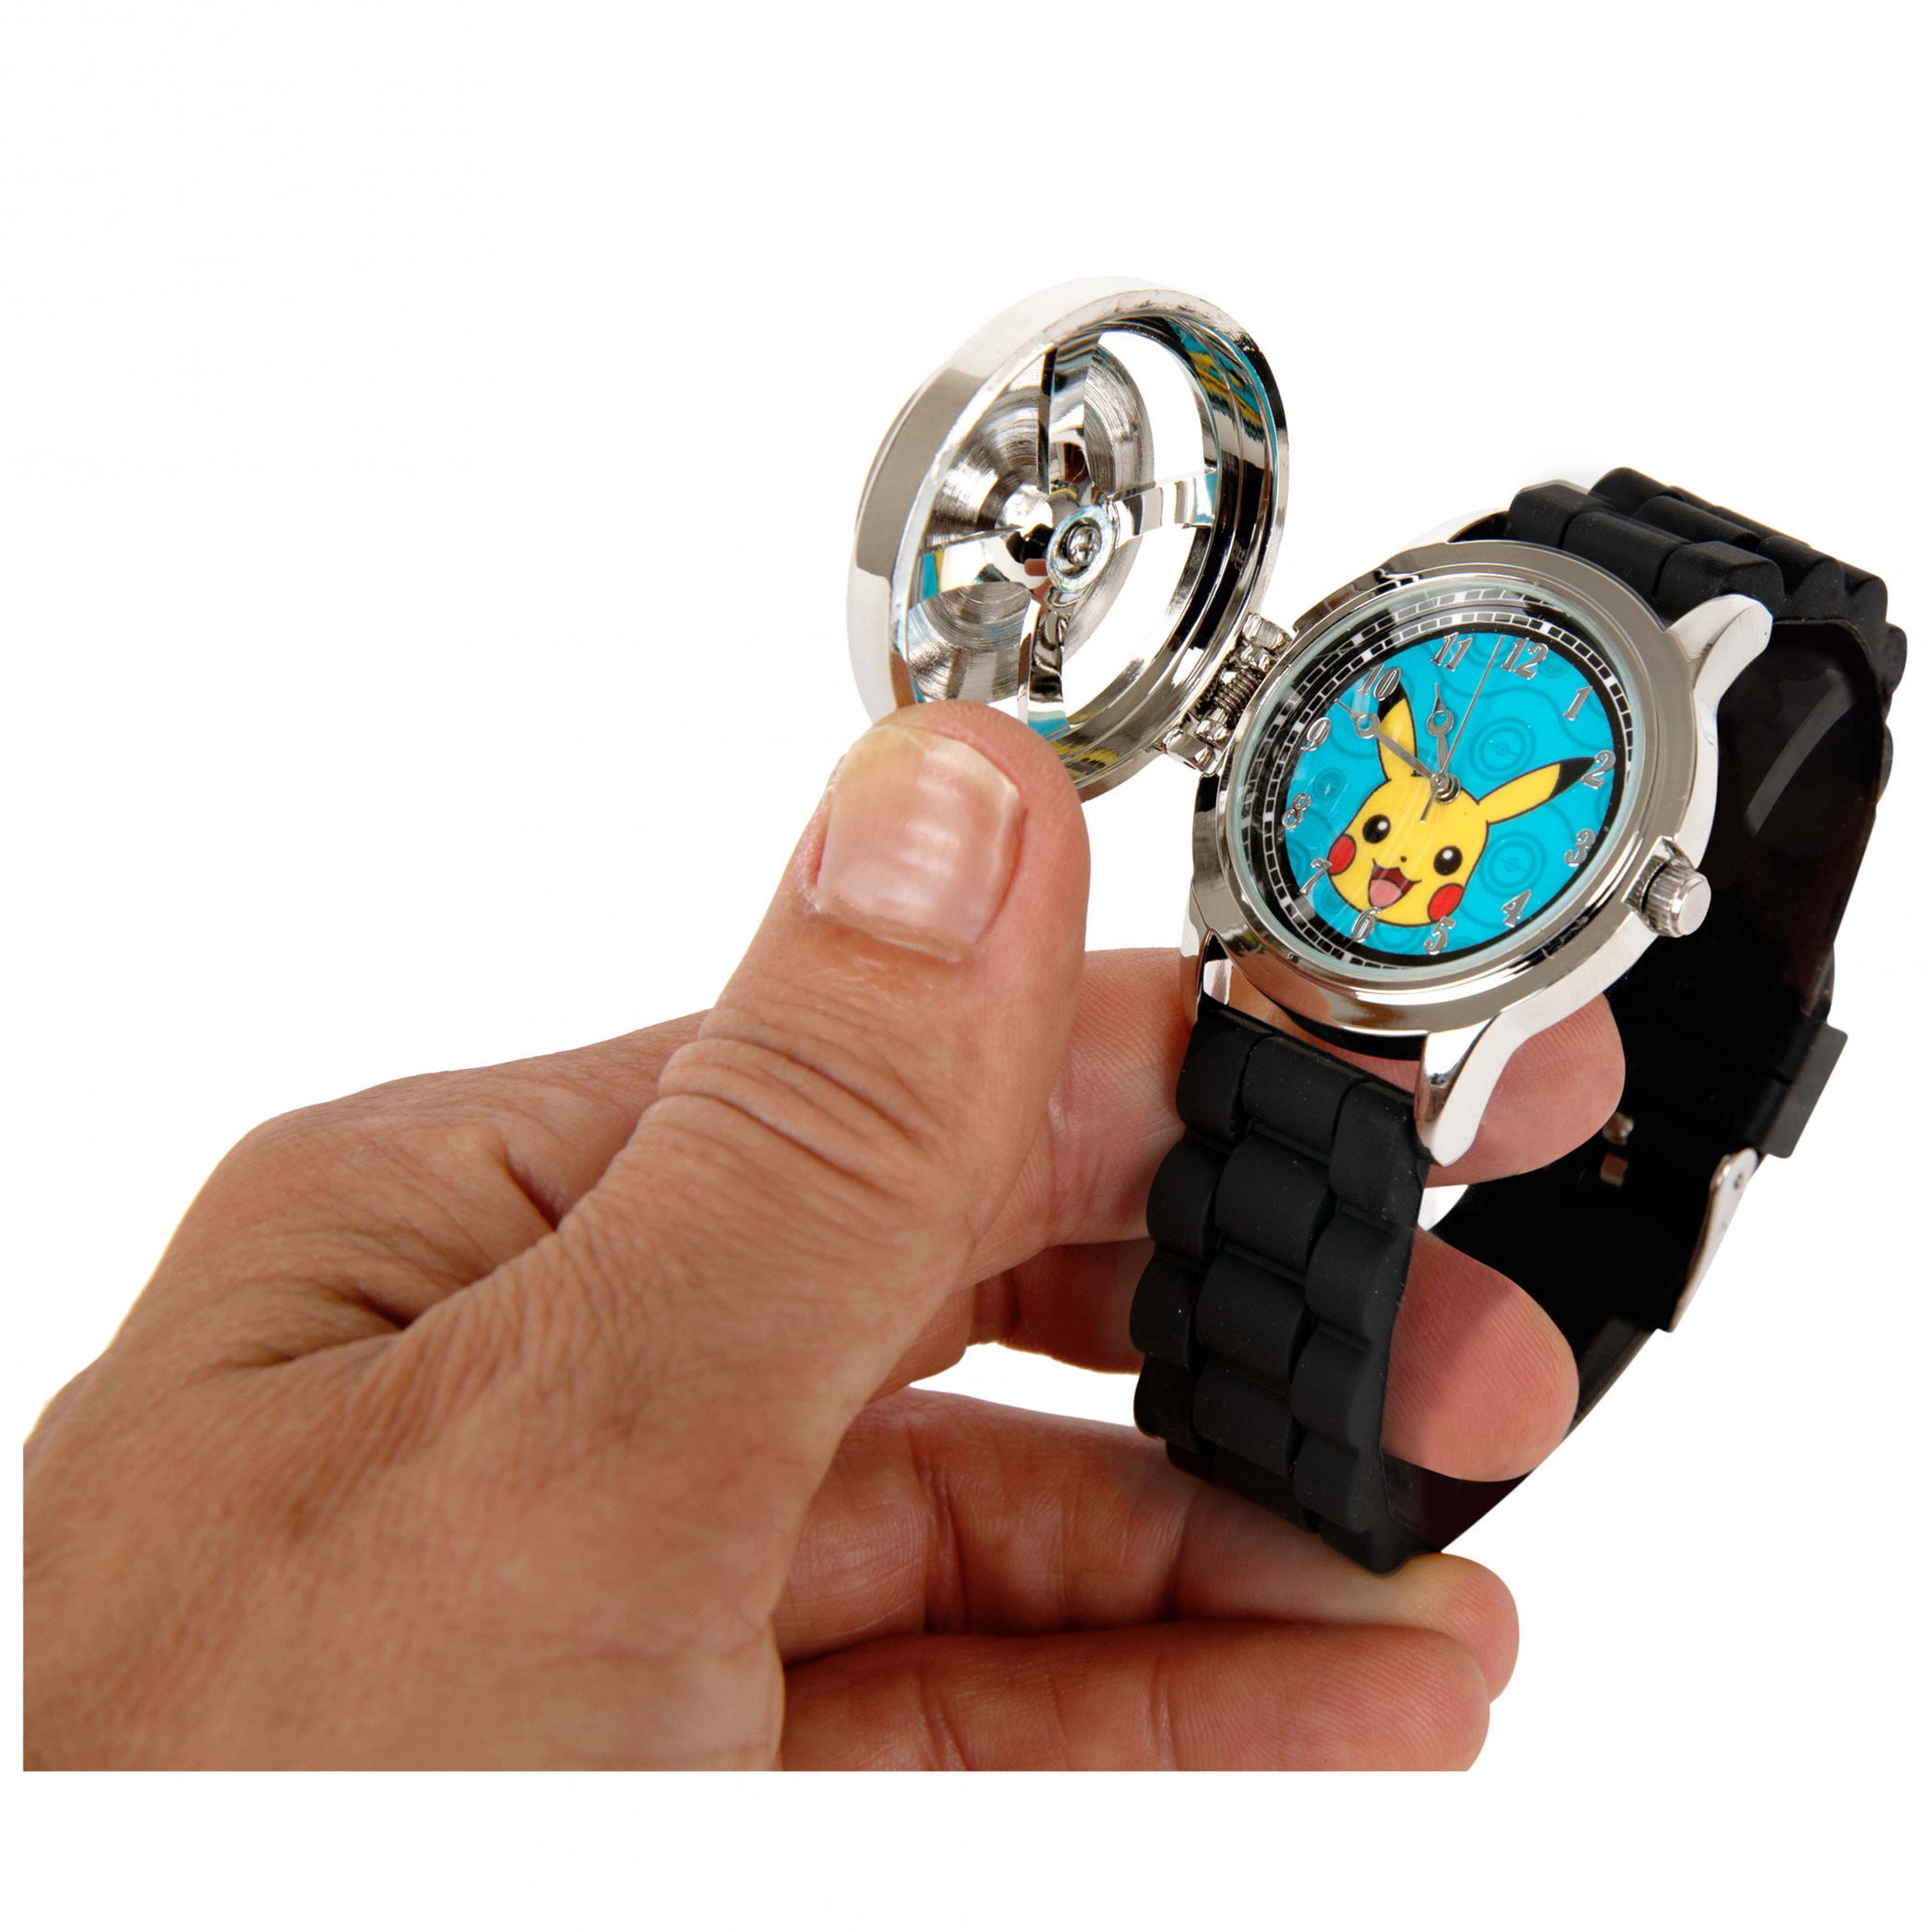 Pokémon Ball with Pikachu Spinner Watch with Rubber Straps